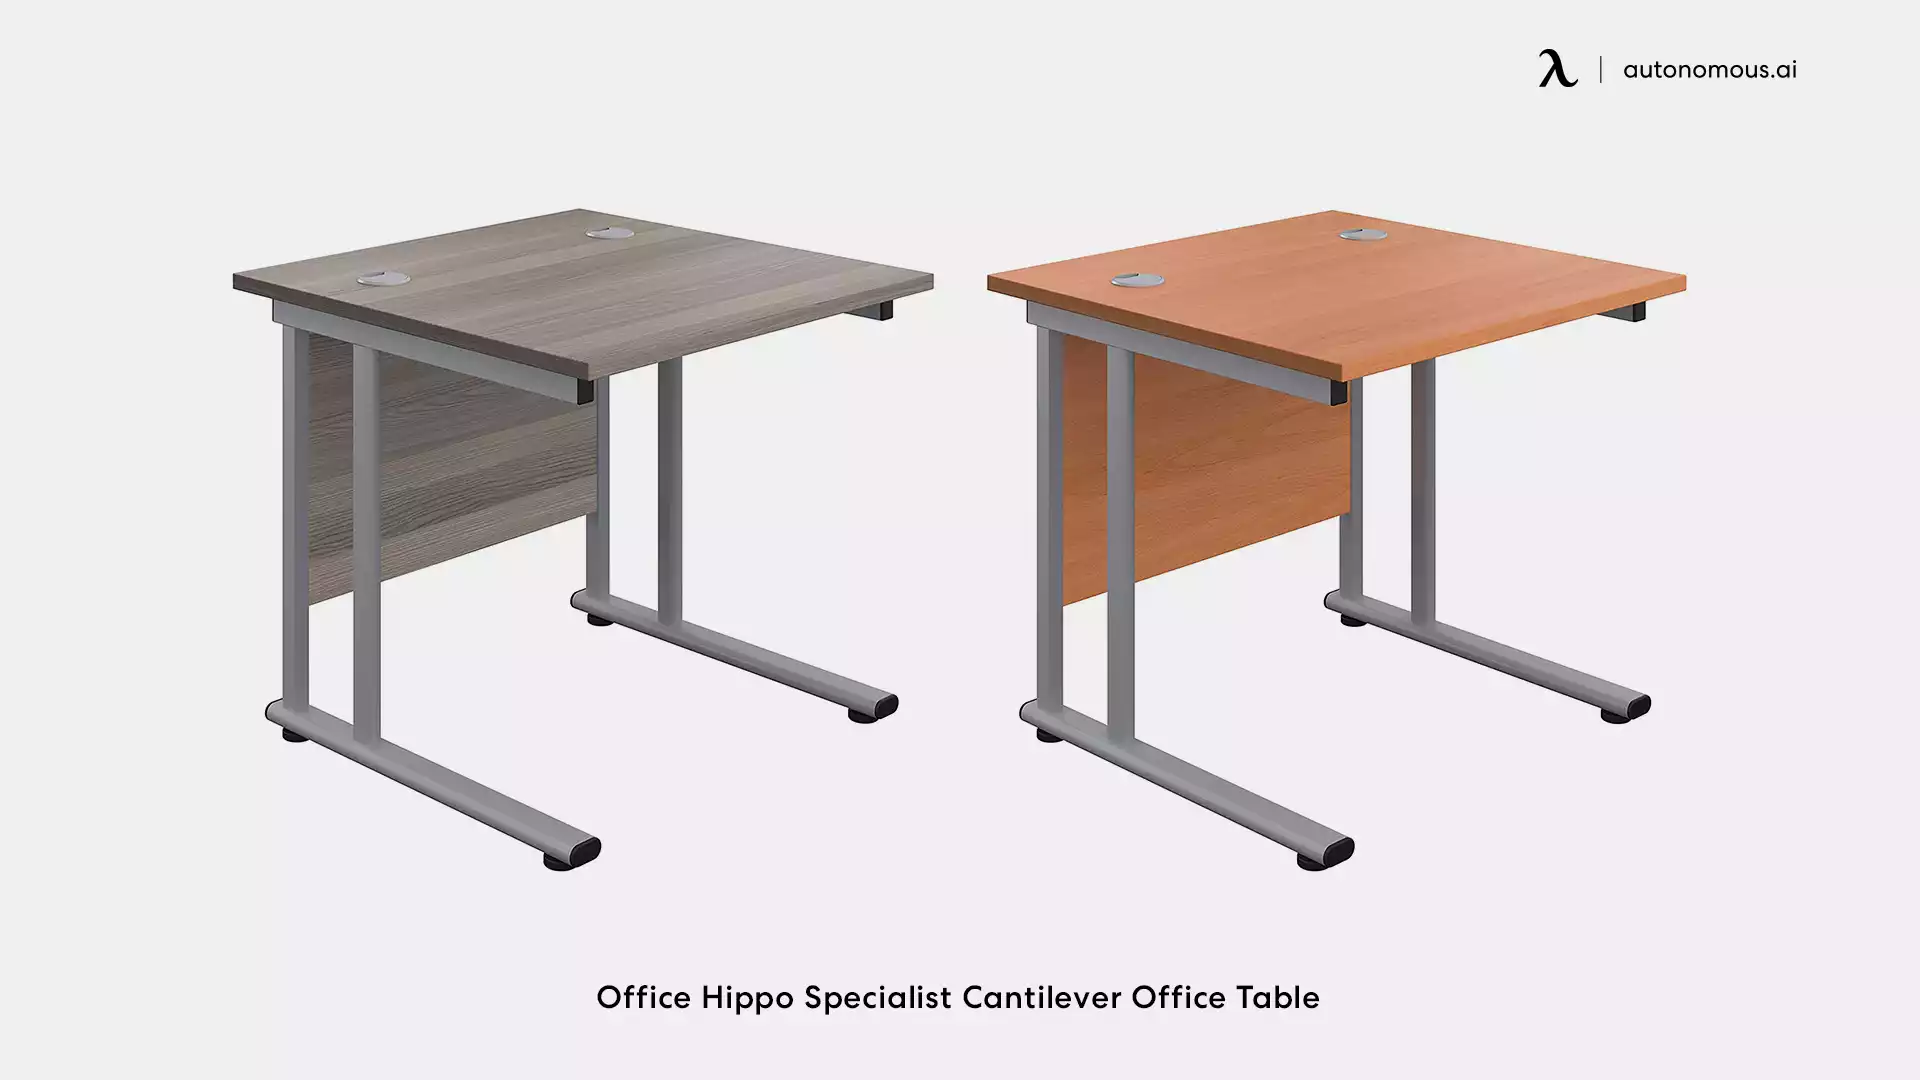 Office Hippo Specialist Cantilever Office Table